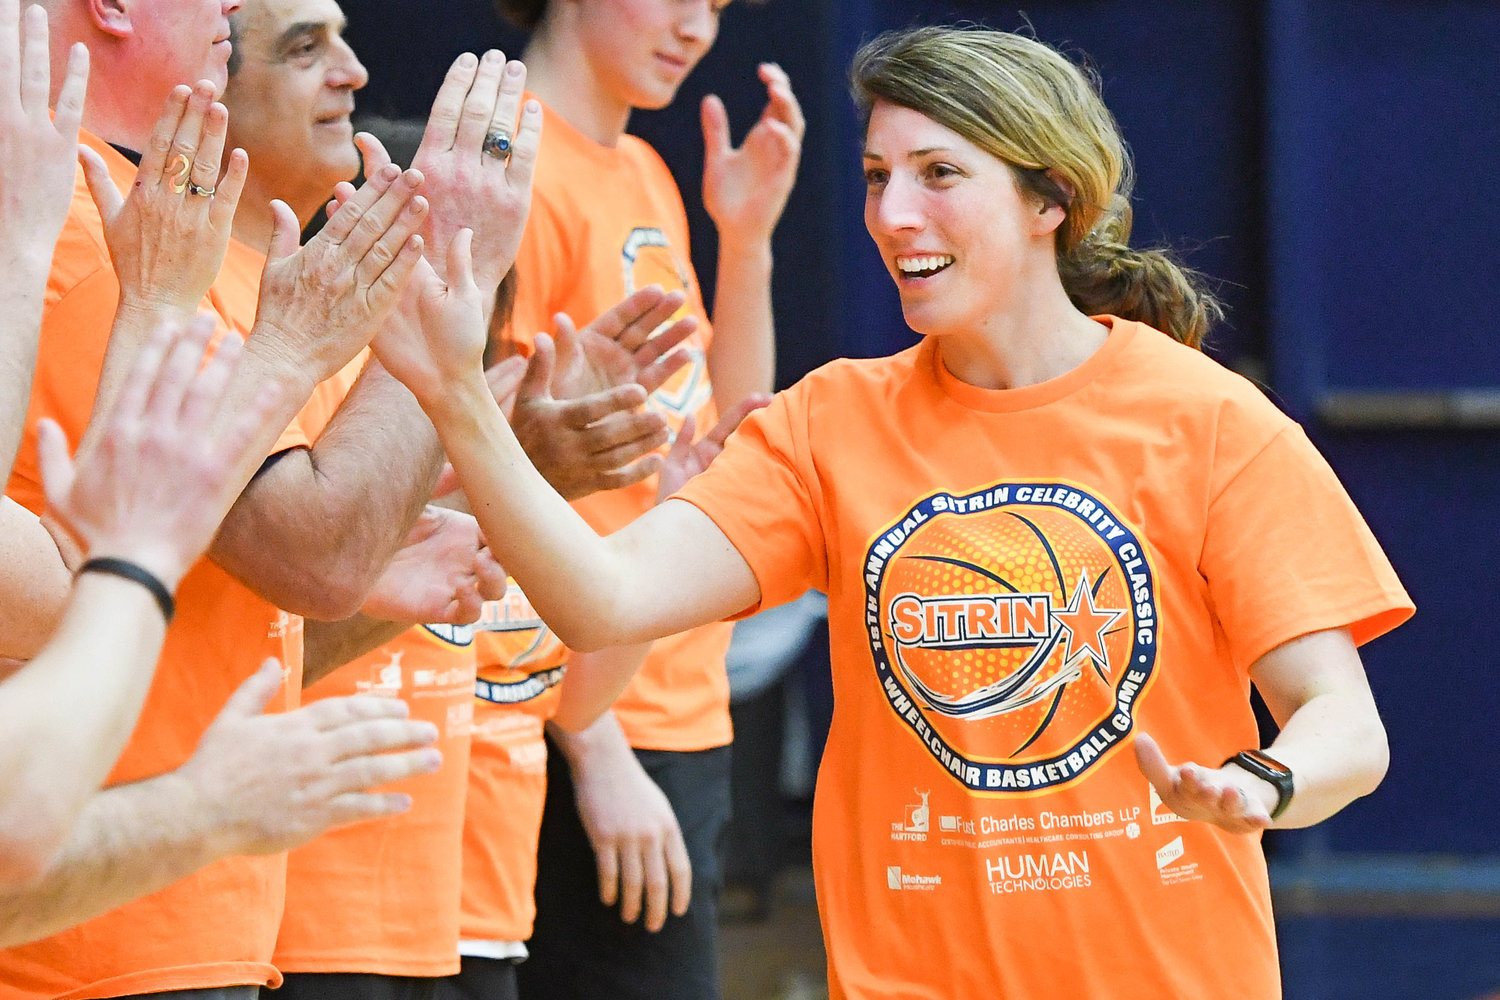 GETTING INTRODUCED — Four-time Olympian Erin Hamlin, of Remsen, is announced to the court before the 18th annual Sitrin Celebrity Wheelchair Basketball Game on Thursday night at Utica University.